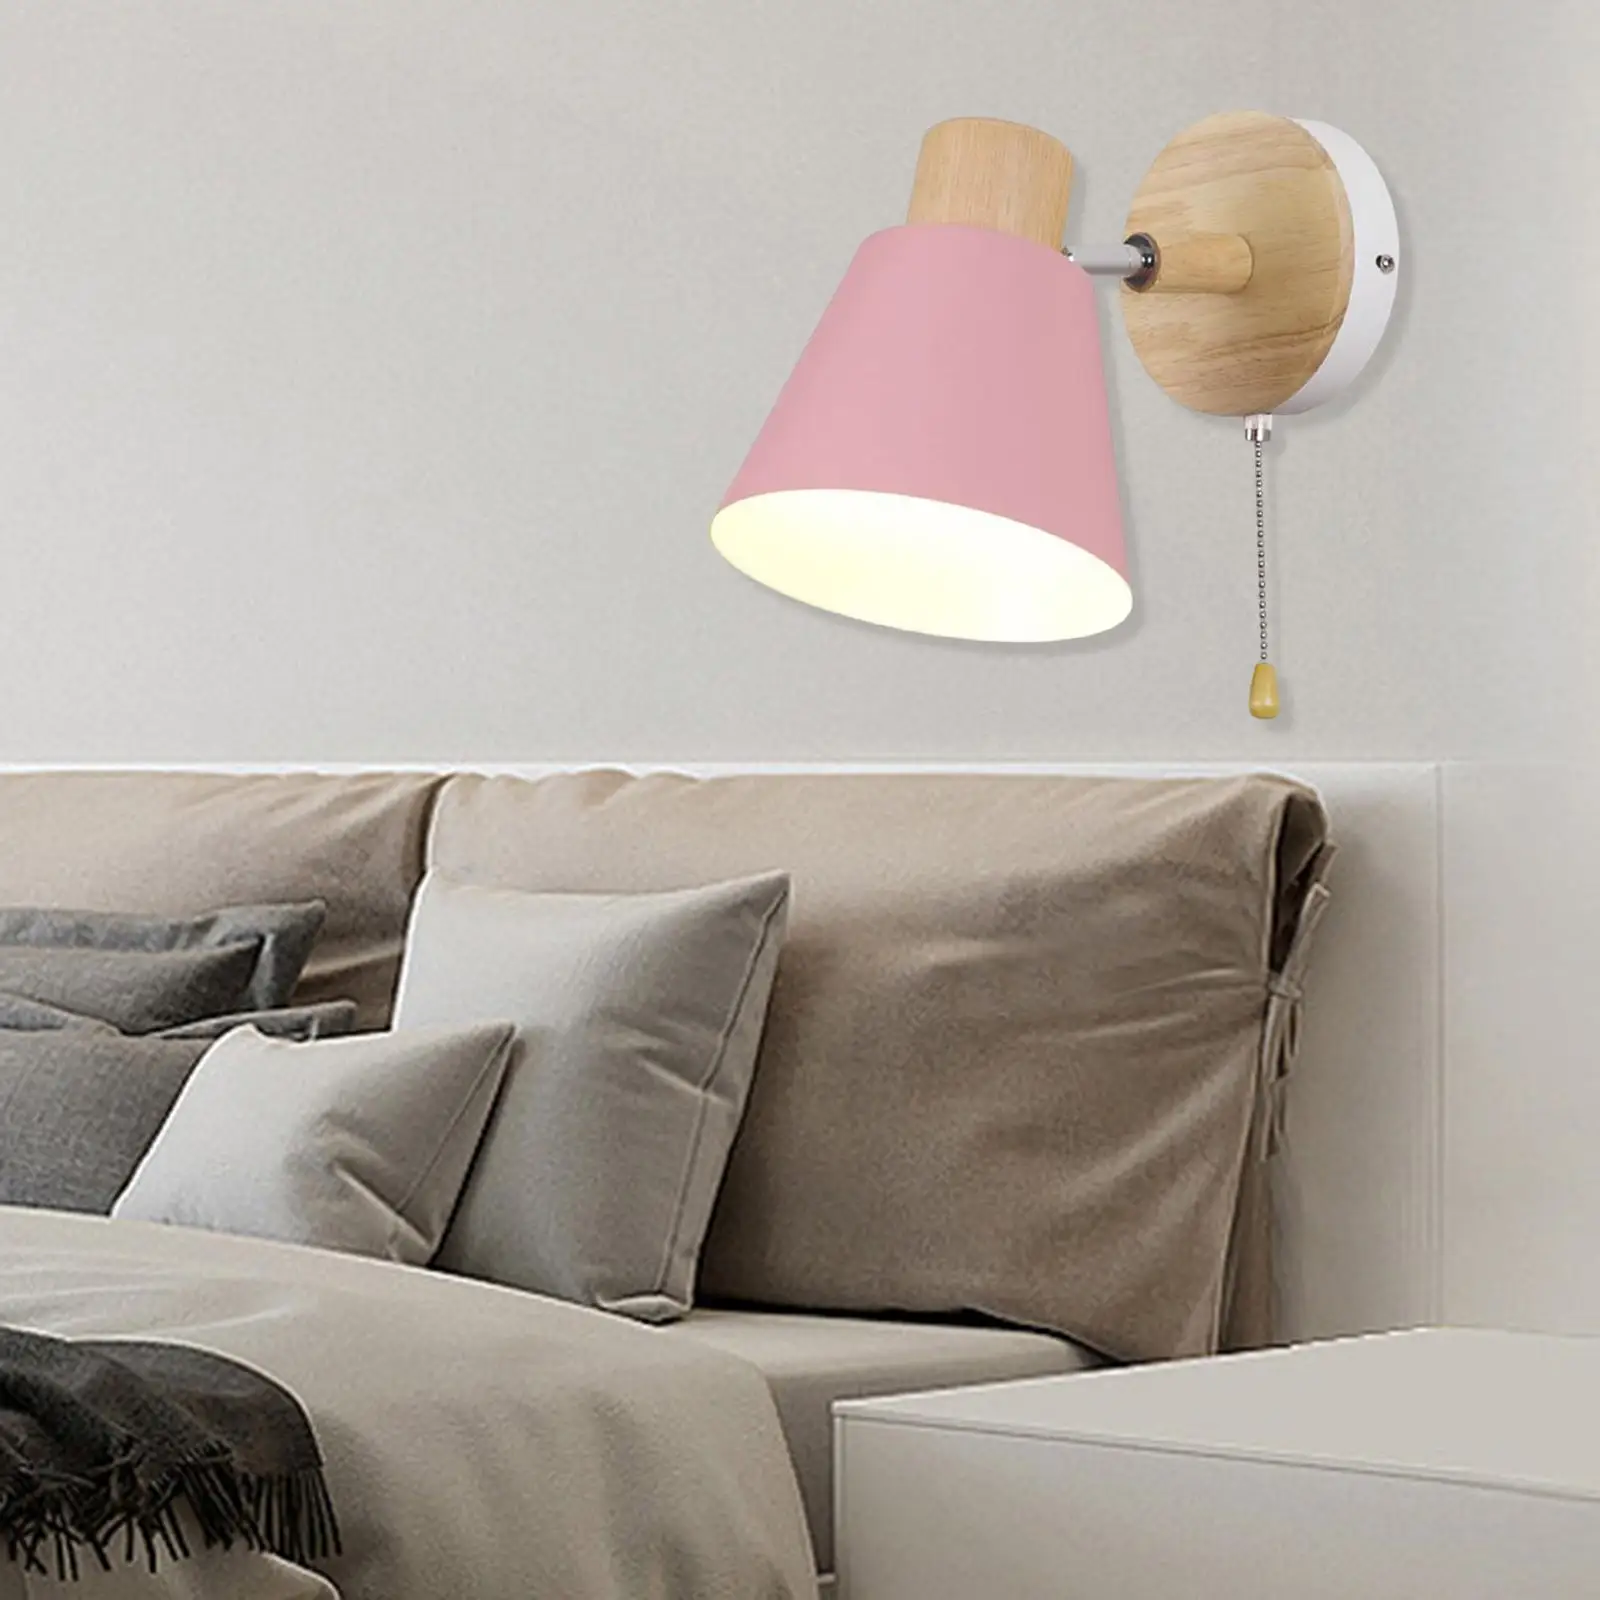 Wall Lamp Light Sconce Adjustable with Pull Chain Switch for Bedroom Decor